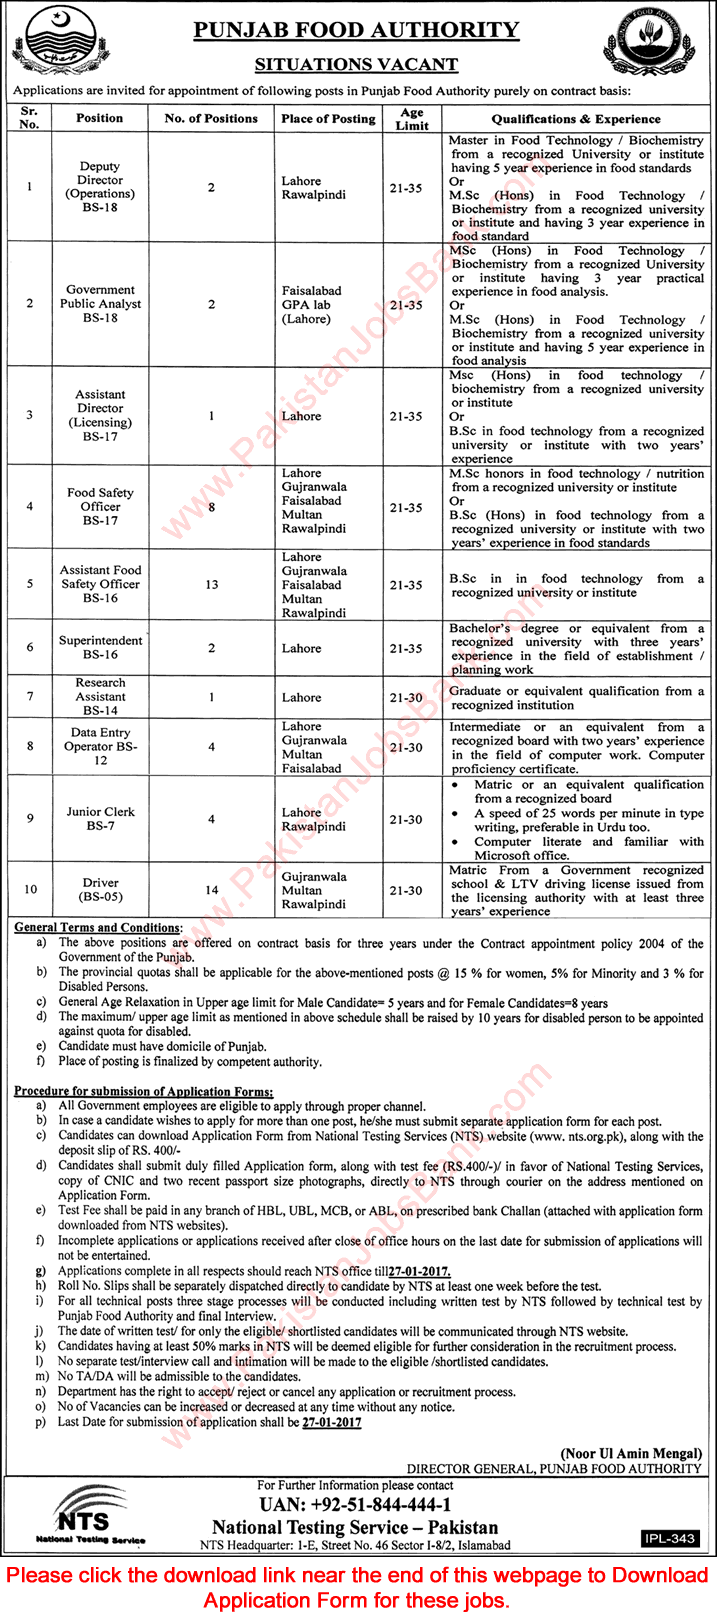 Punjab Food Authority Jobs 2017 NTS Application Form Food Safety Officers, DEO, Drivers & Others Latest